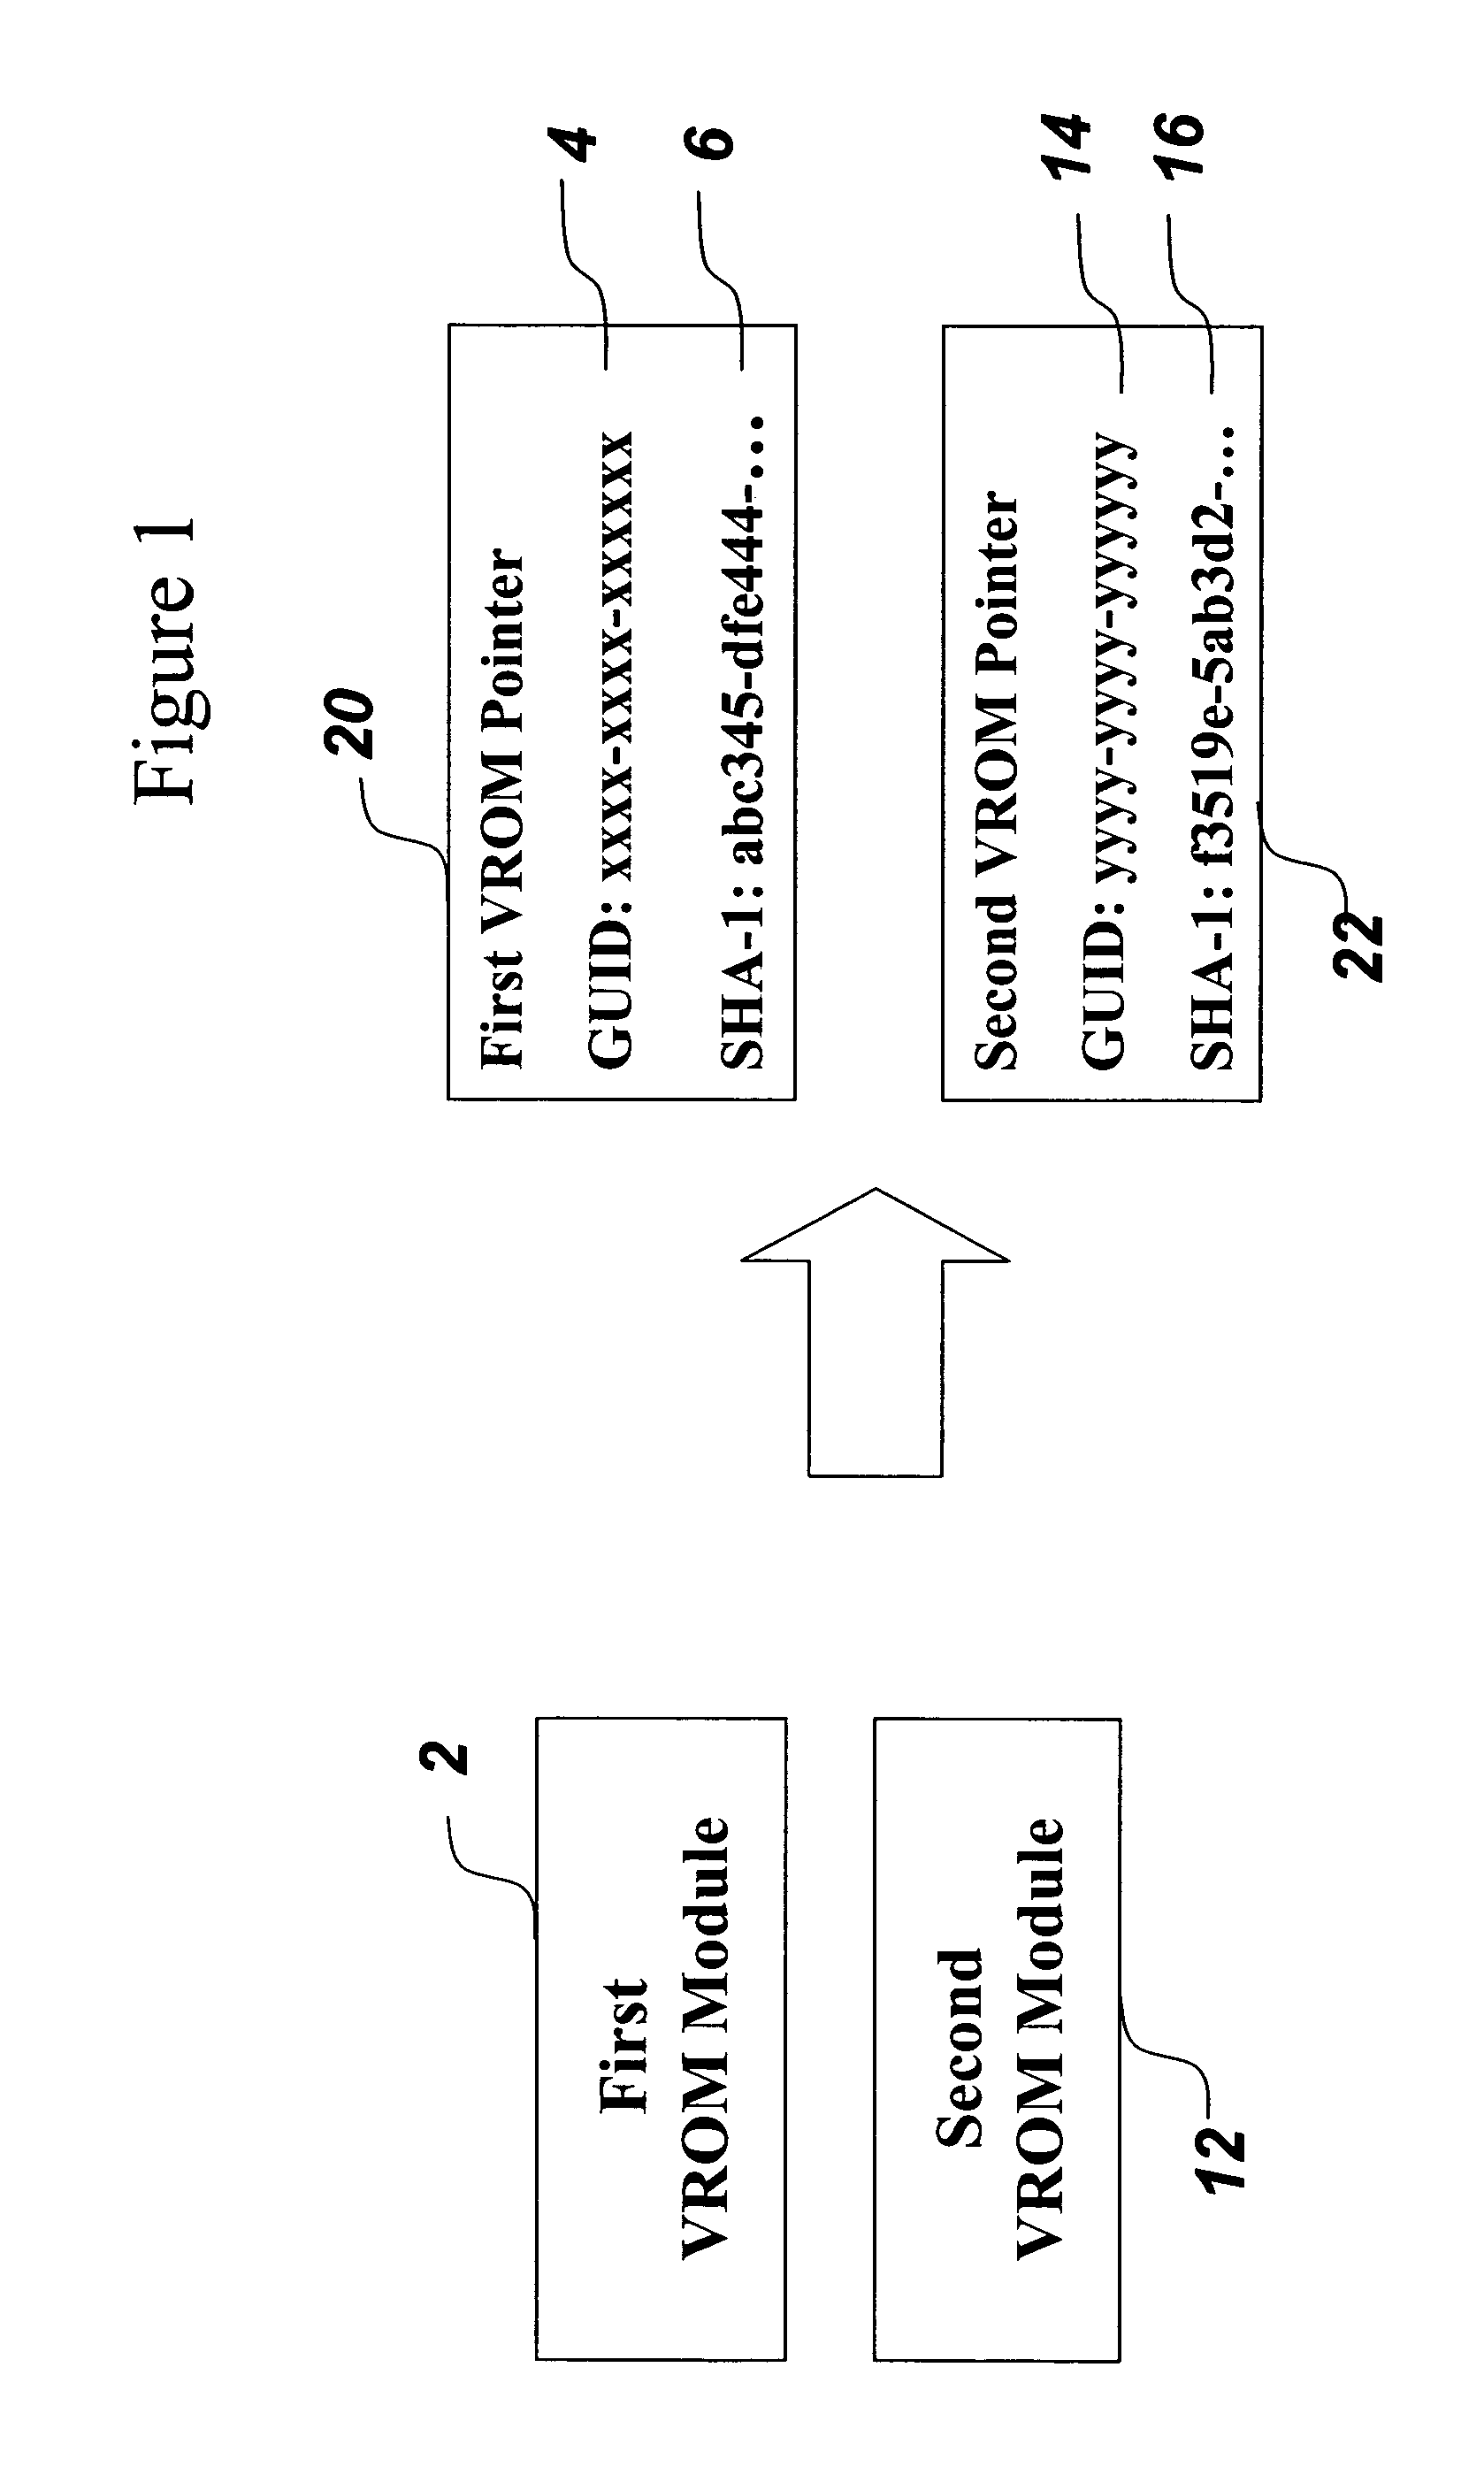 System and method for reducing memory requirements of firmware